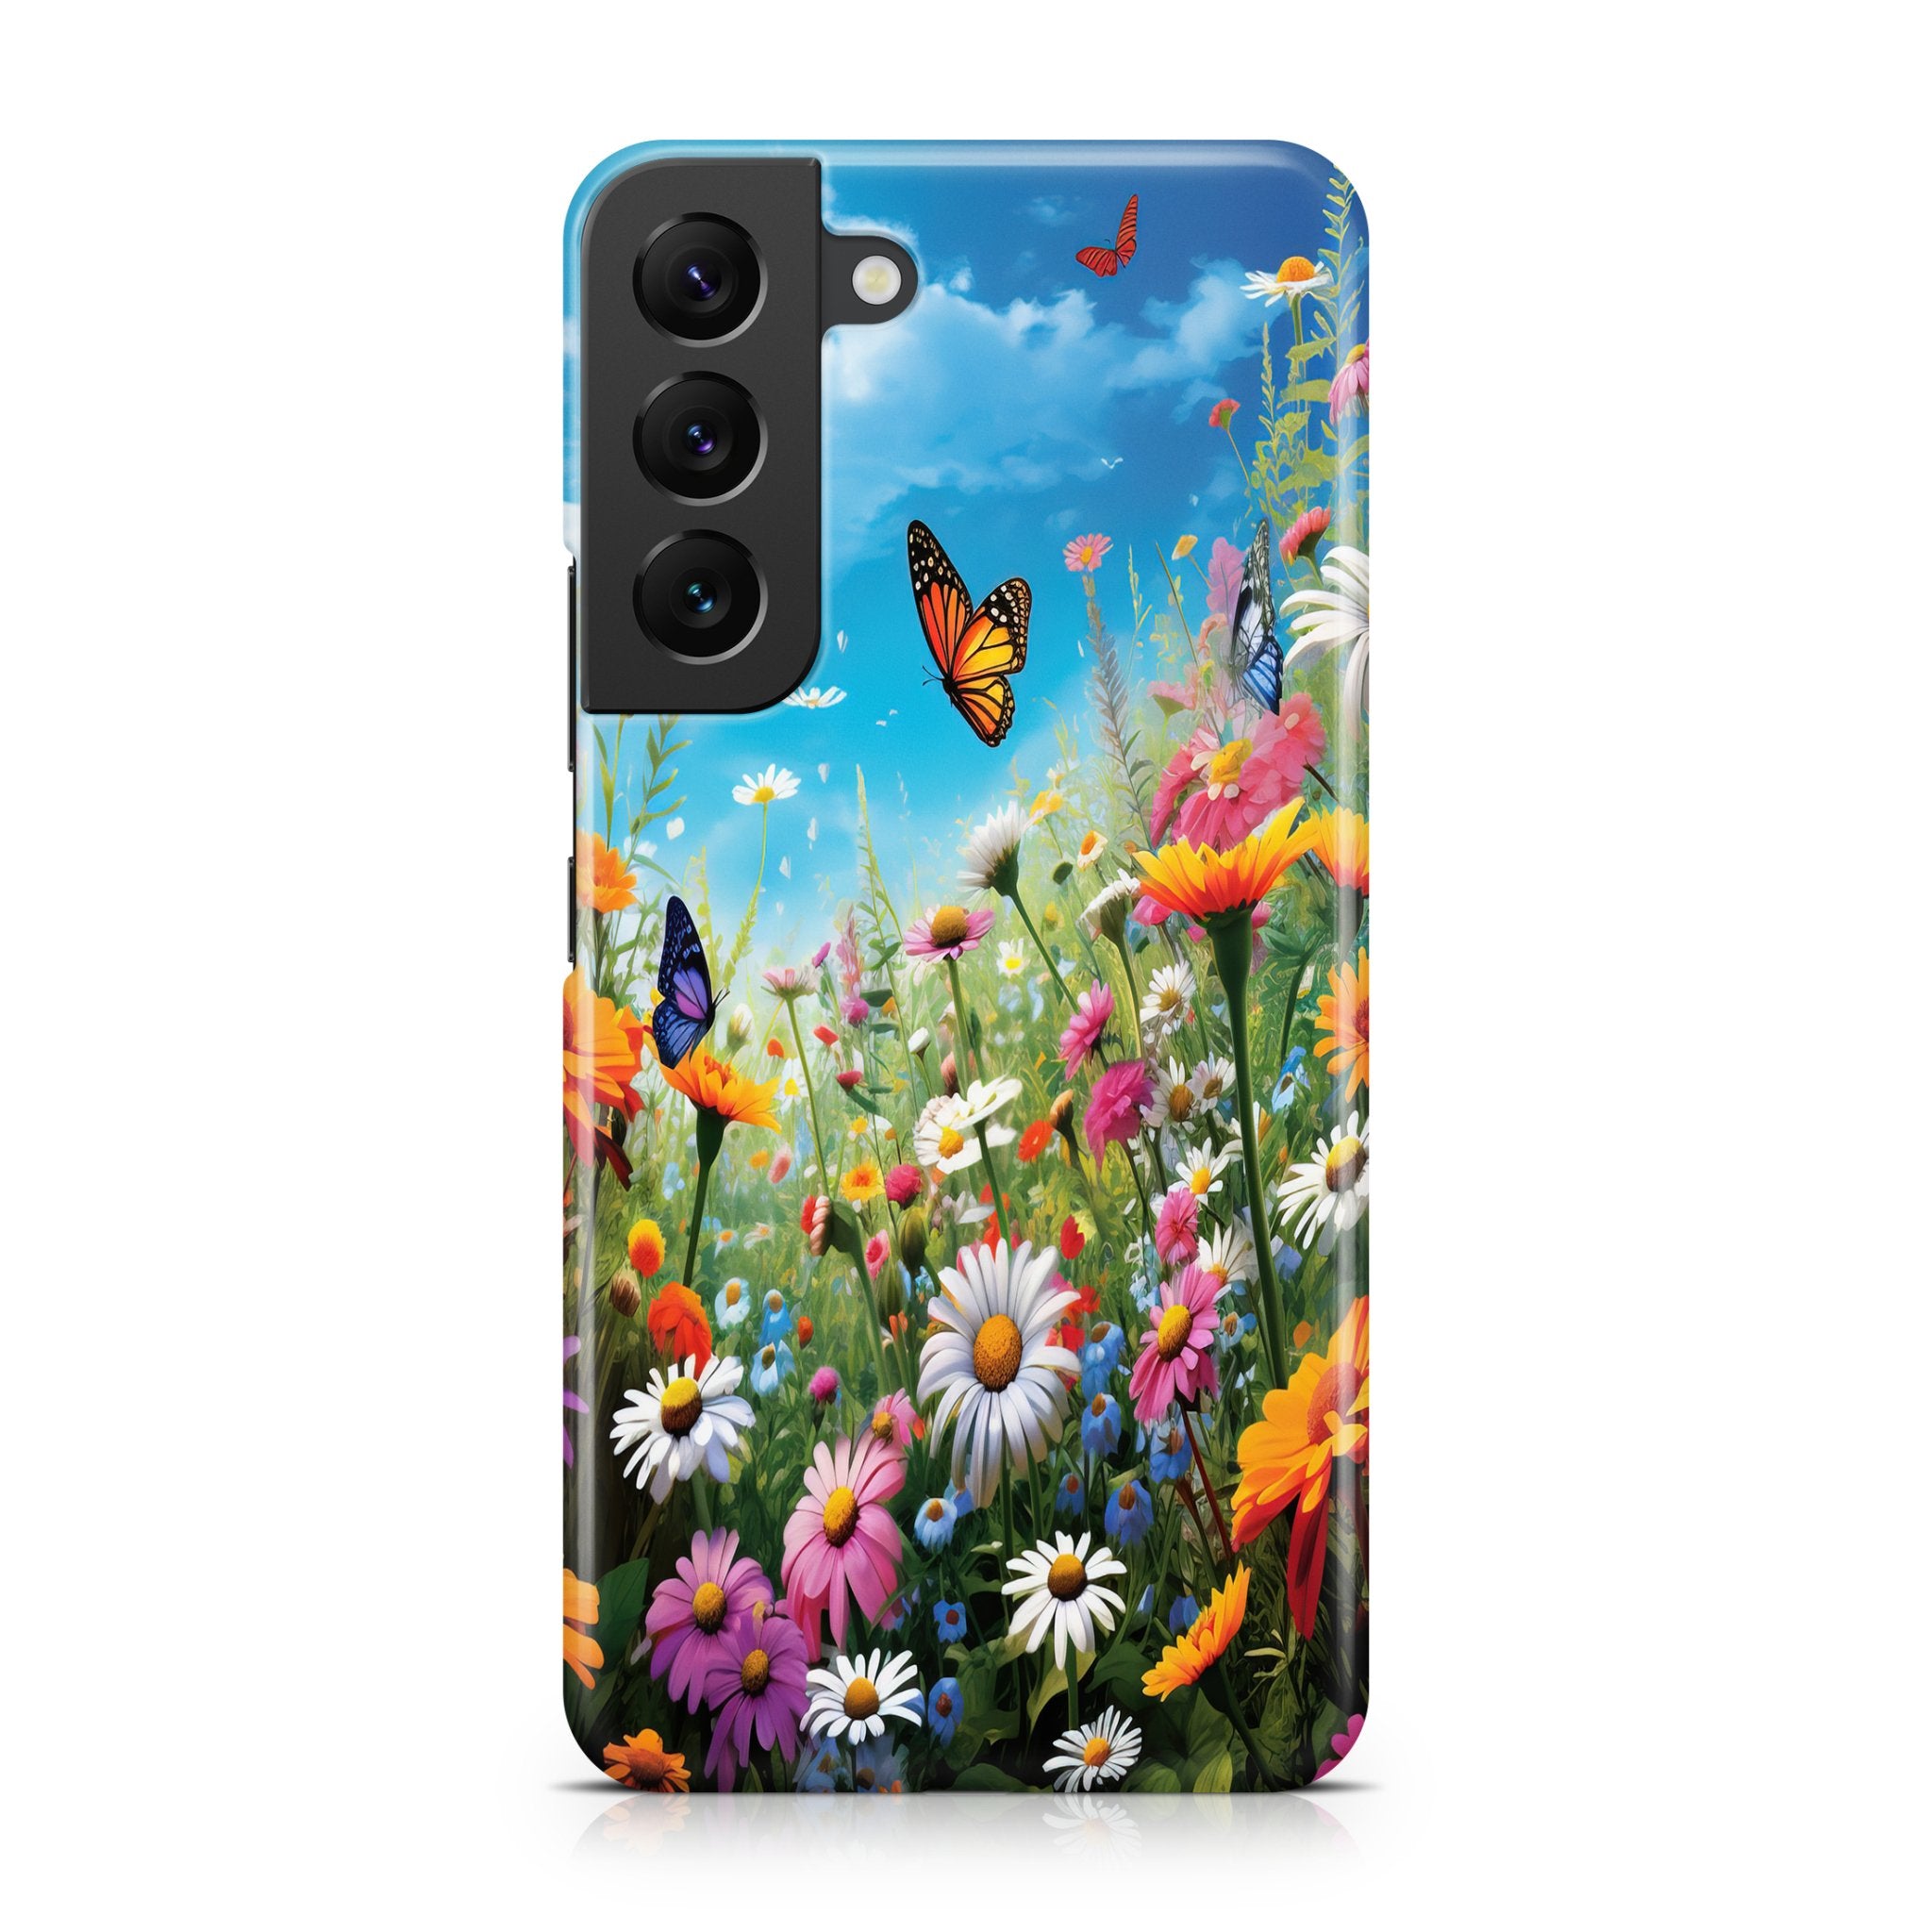 Beauty Embrace - Samsung phone case designs by CaseSwagger